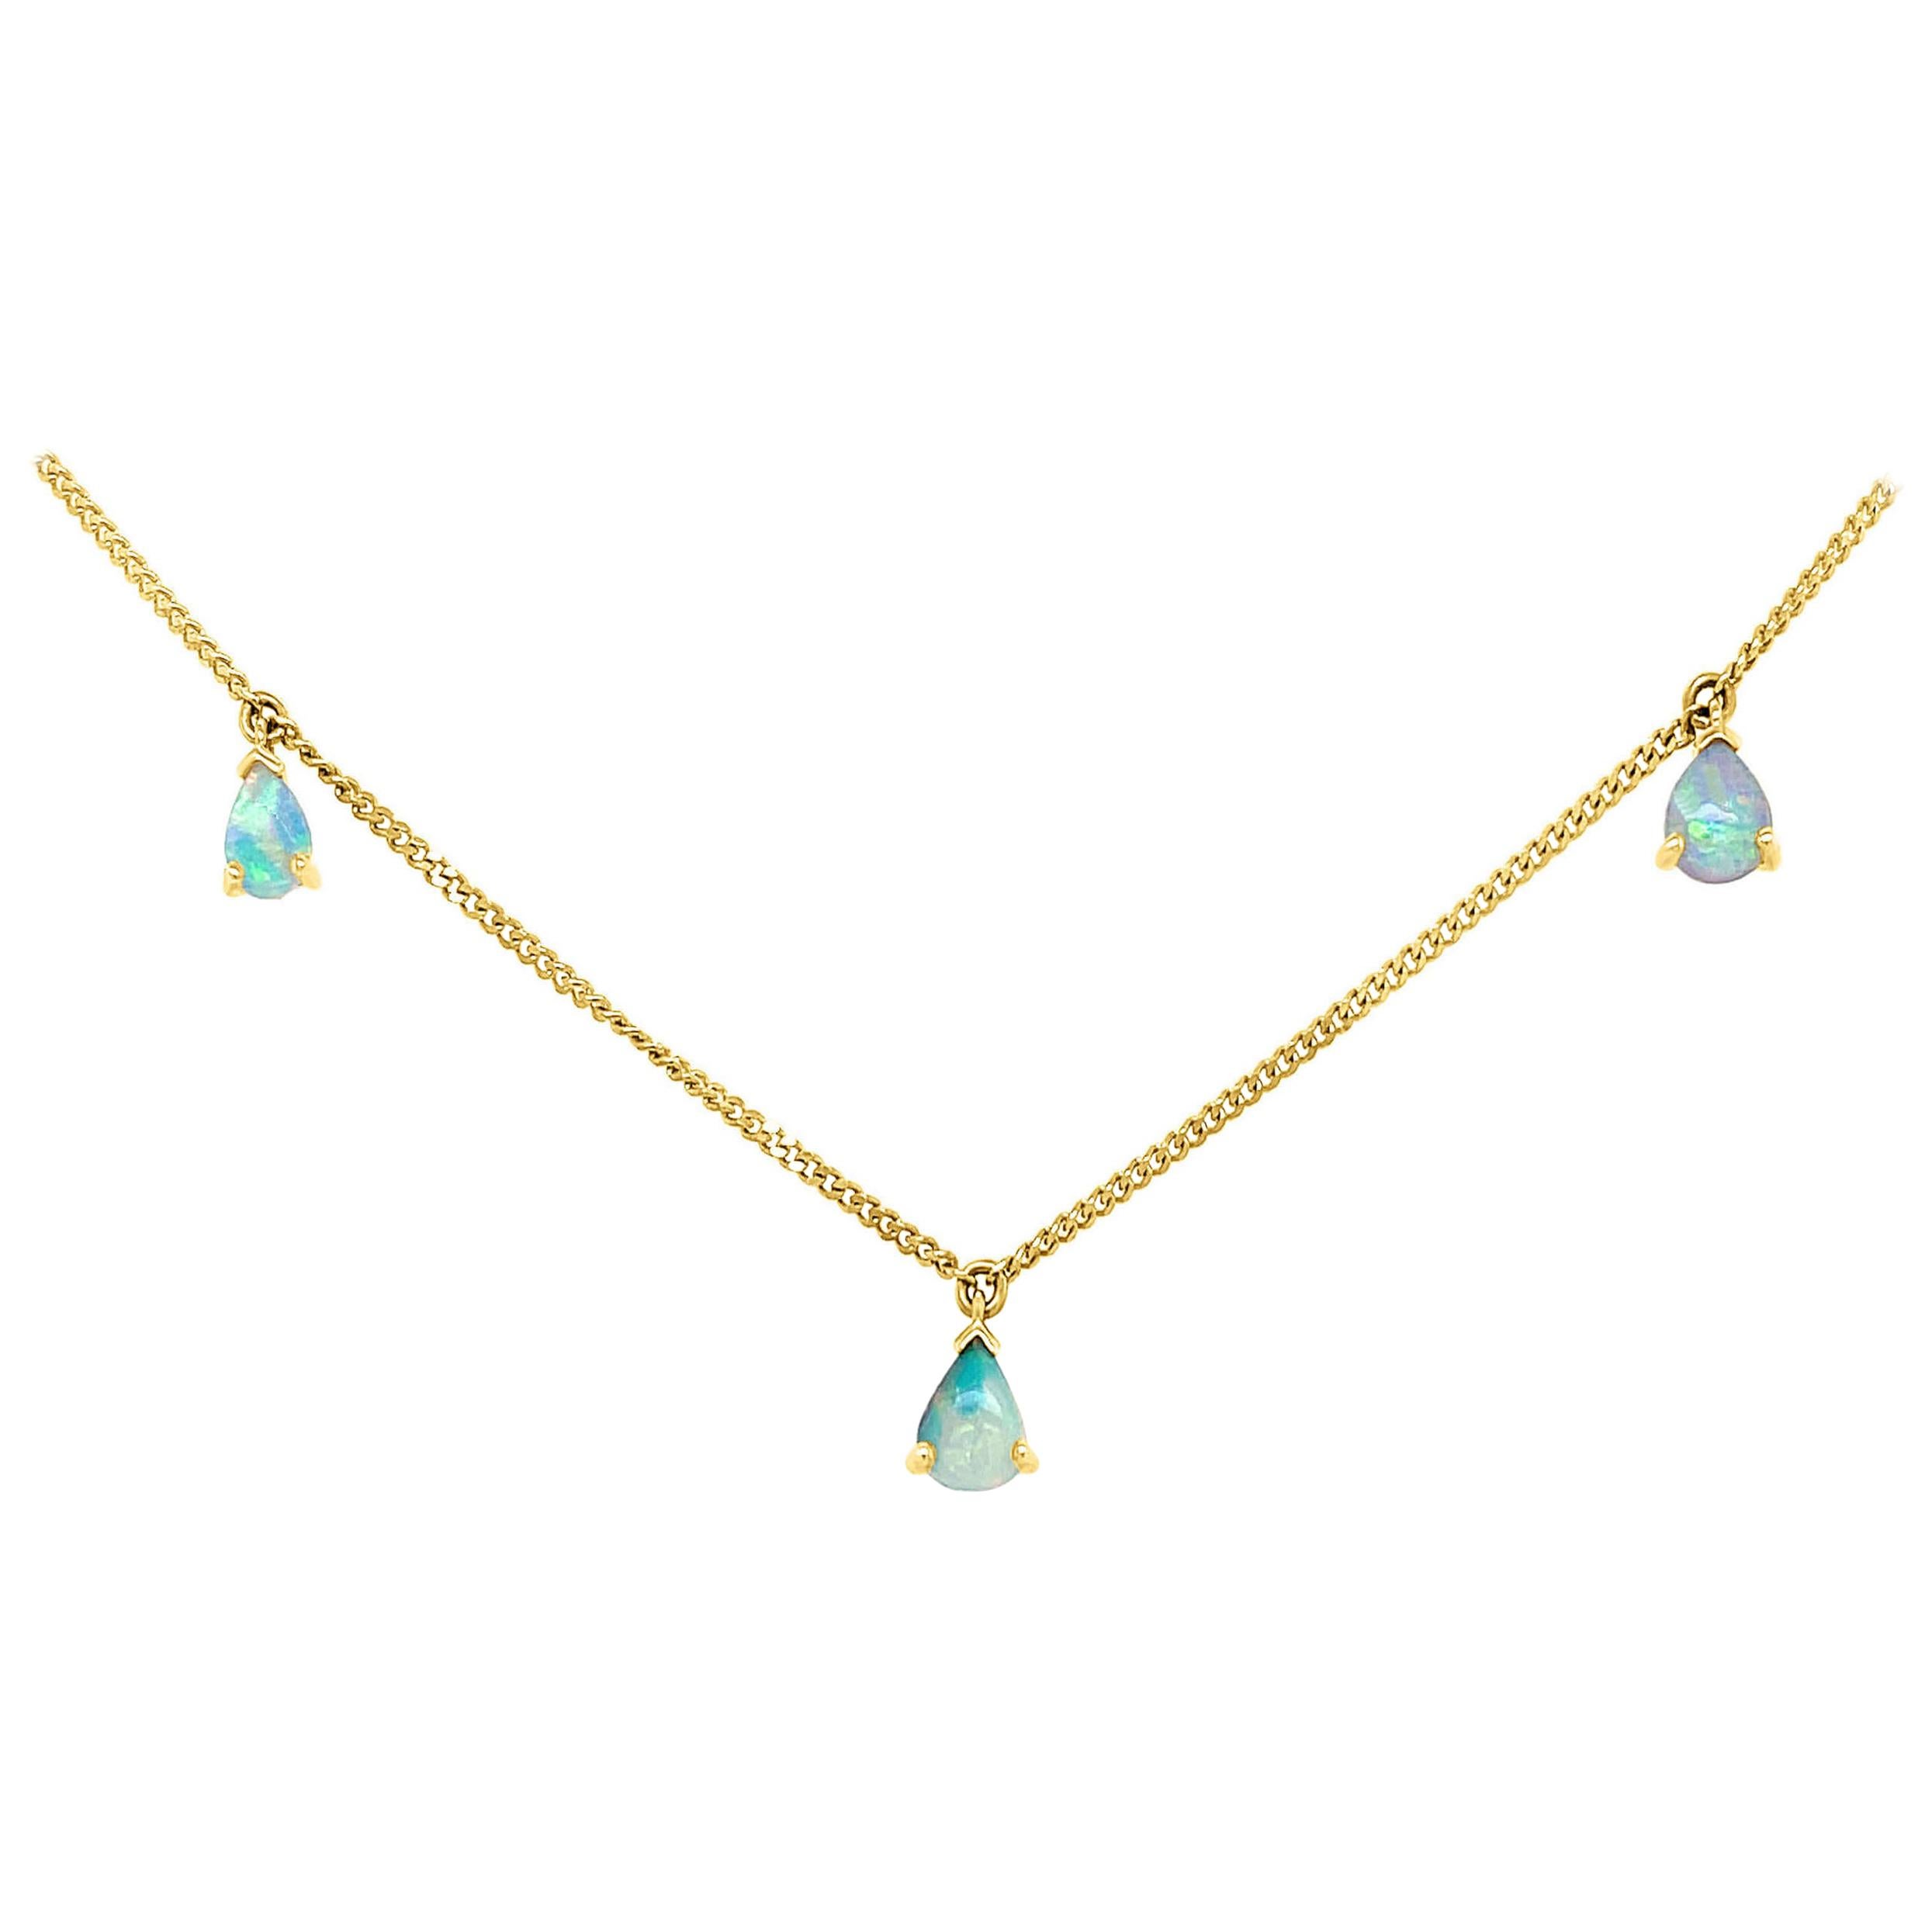 Australian Natural Untreated Boulder Opals Necklace in 18k Yellow Gold